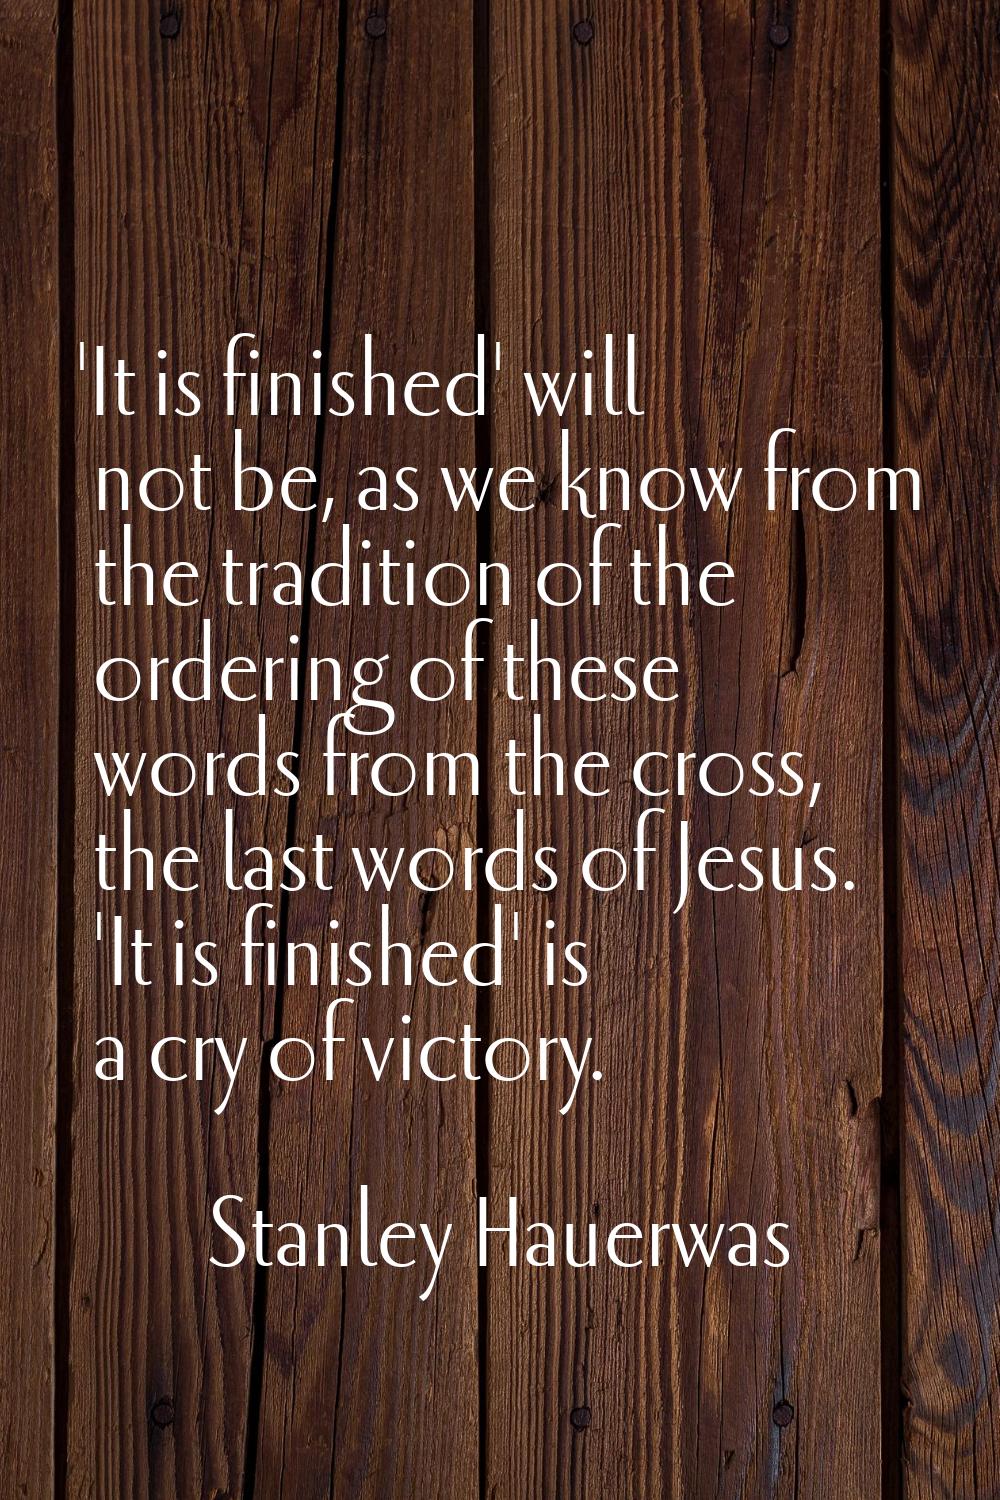 'It is finished' will not be, as we know from the tradition of the ordering of these words from the